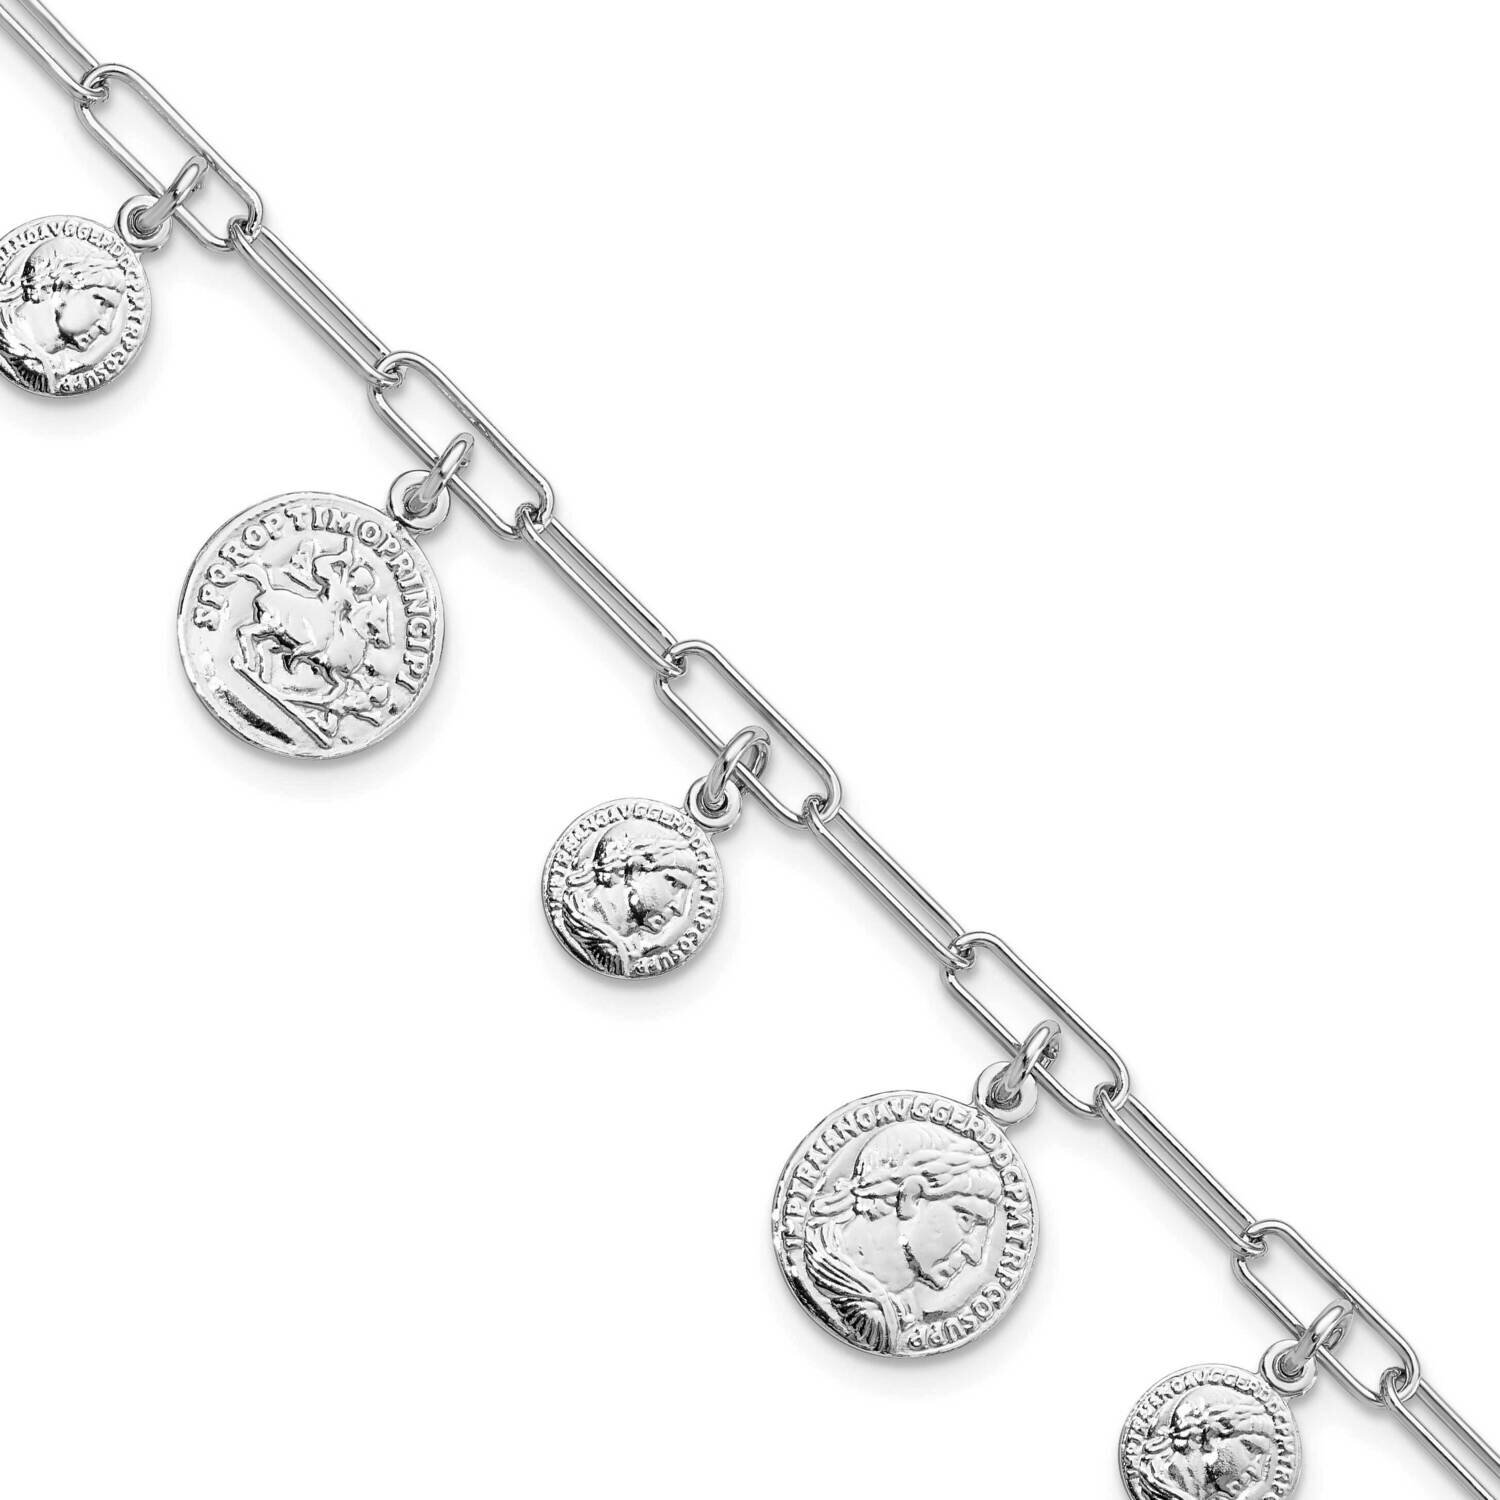 Coin Charm with 1 Inch Extender Bracelet Sterling Silver Rhodium-Plated Polished QG5992-6.75